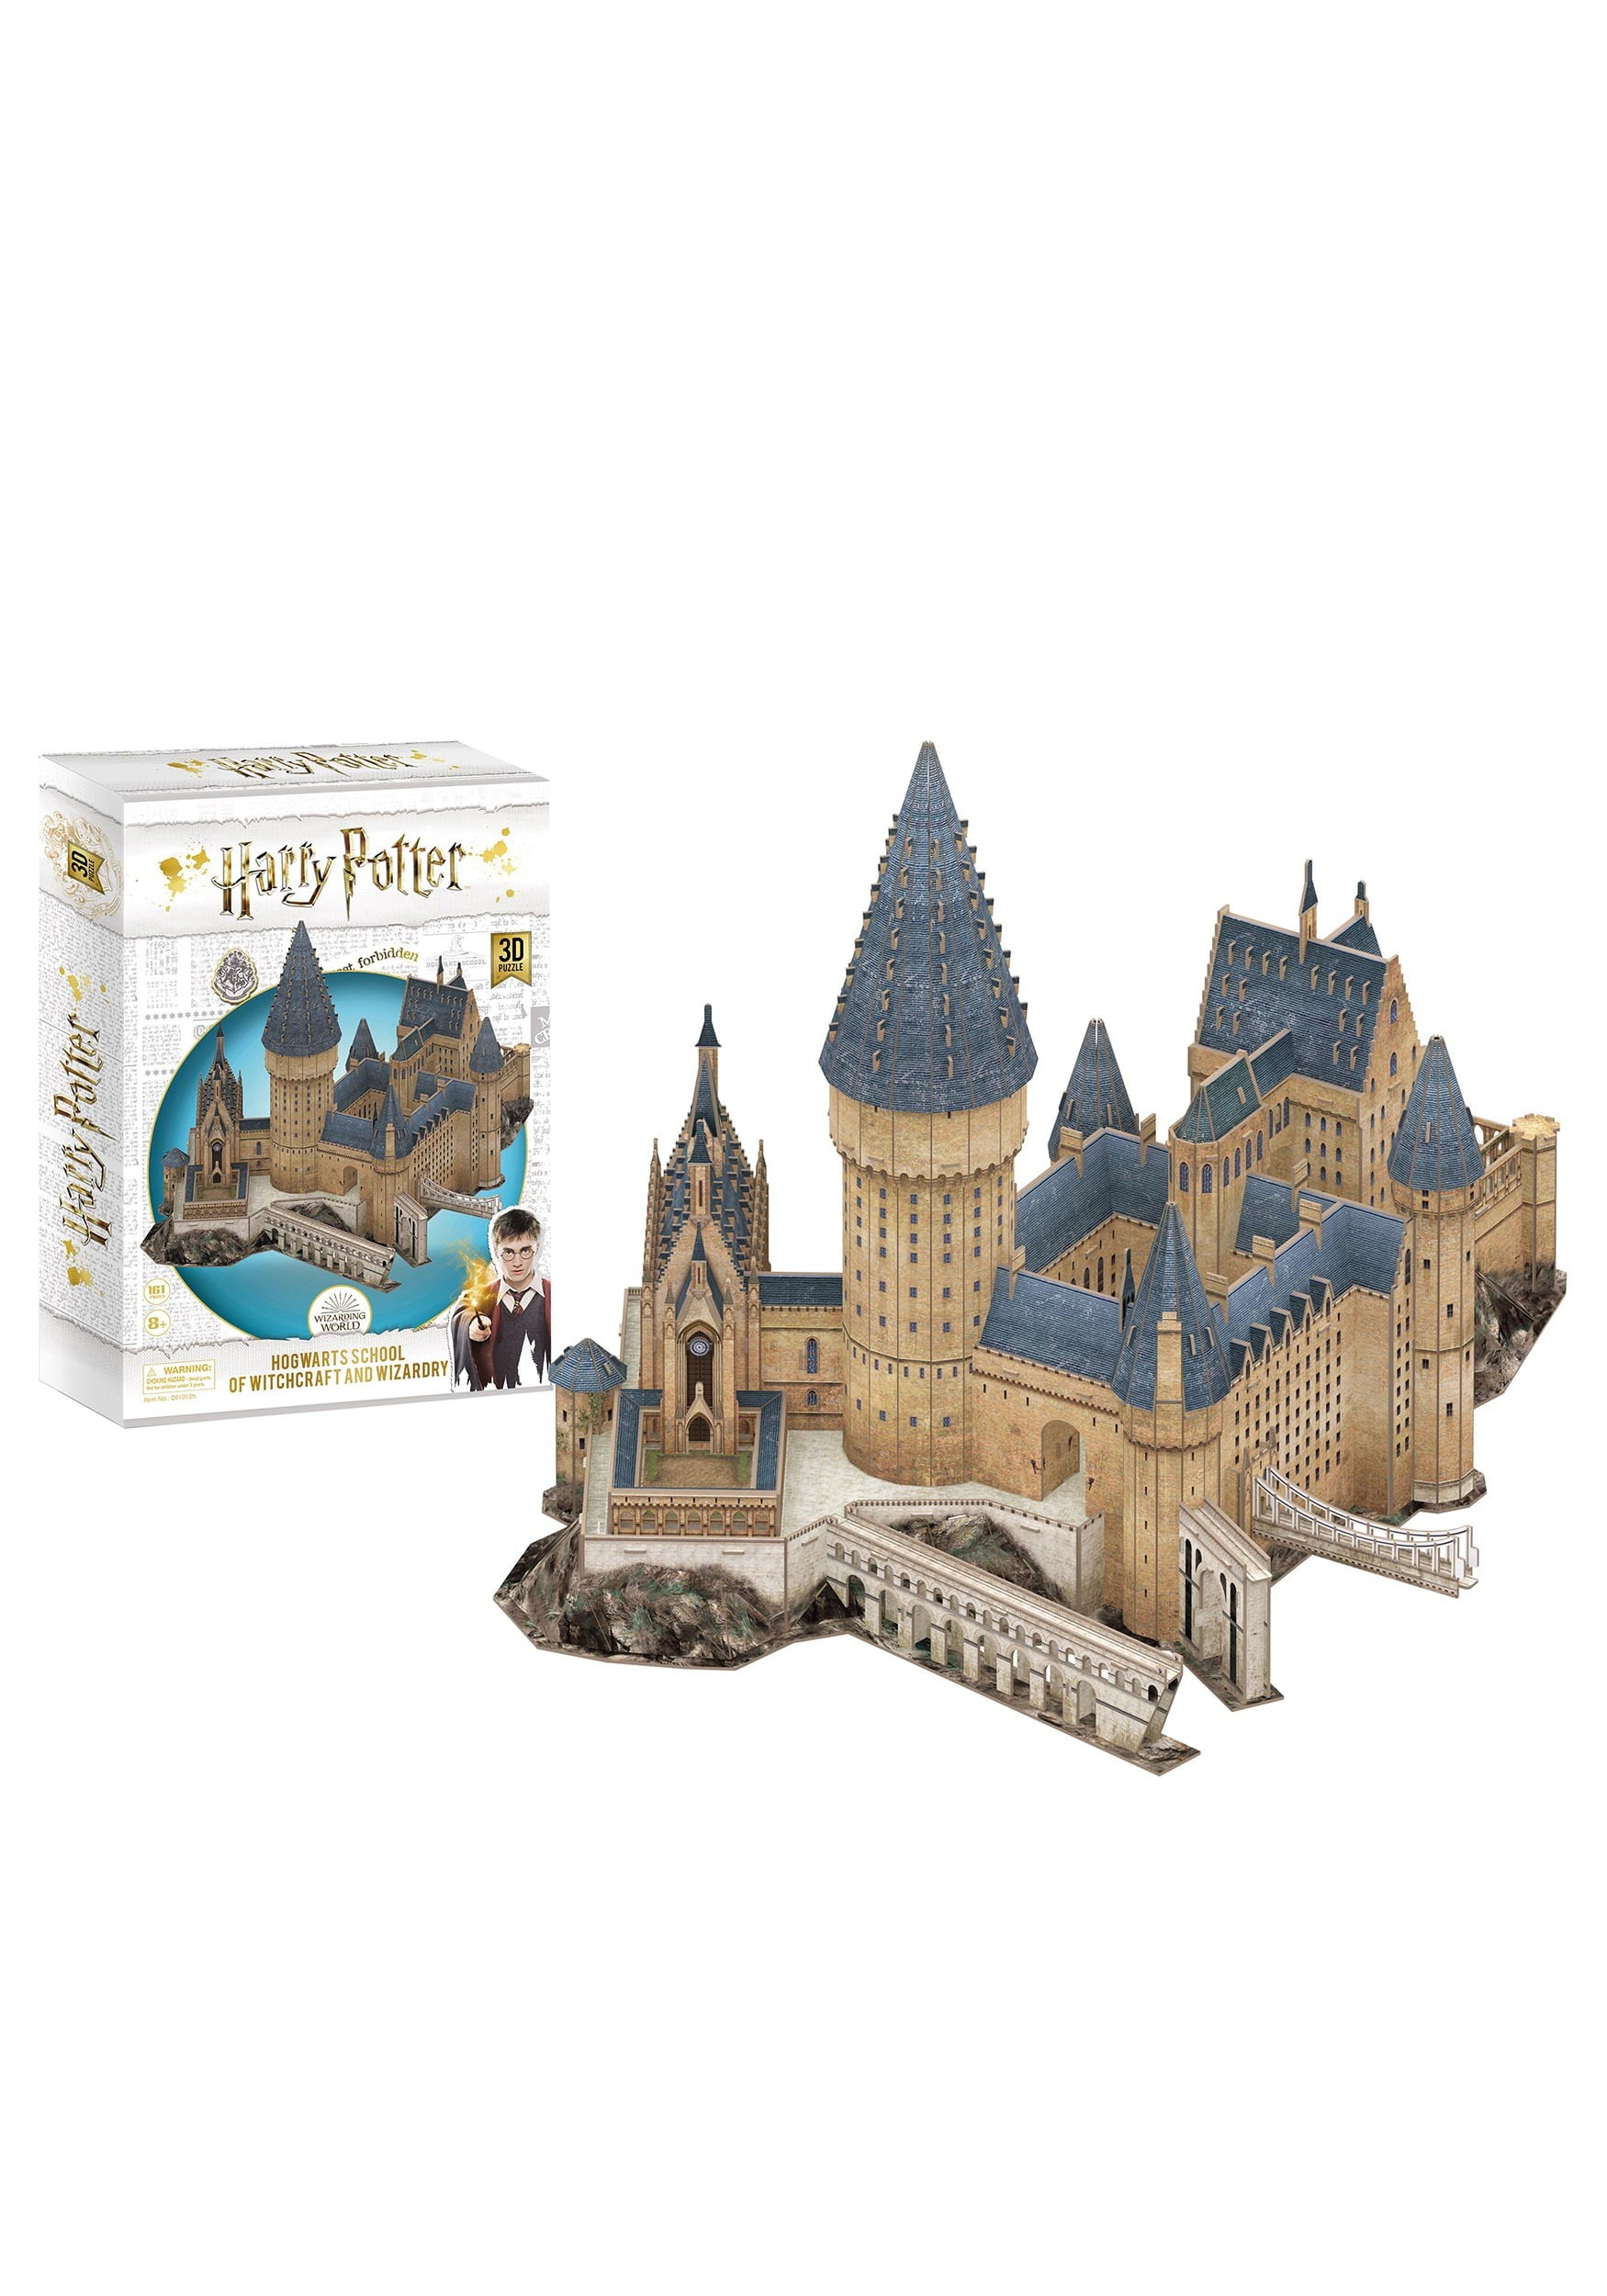 Details about   Hogwarts Jigsaw 1000Pcs Castle Puzzle Harry Poter Adult Kid Educational Toy Gift 